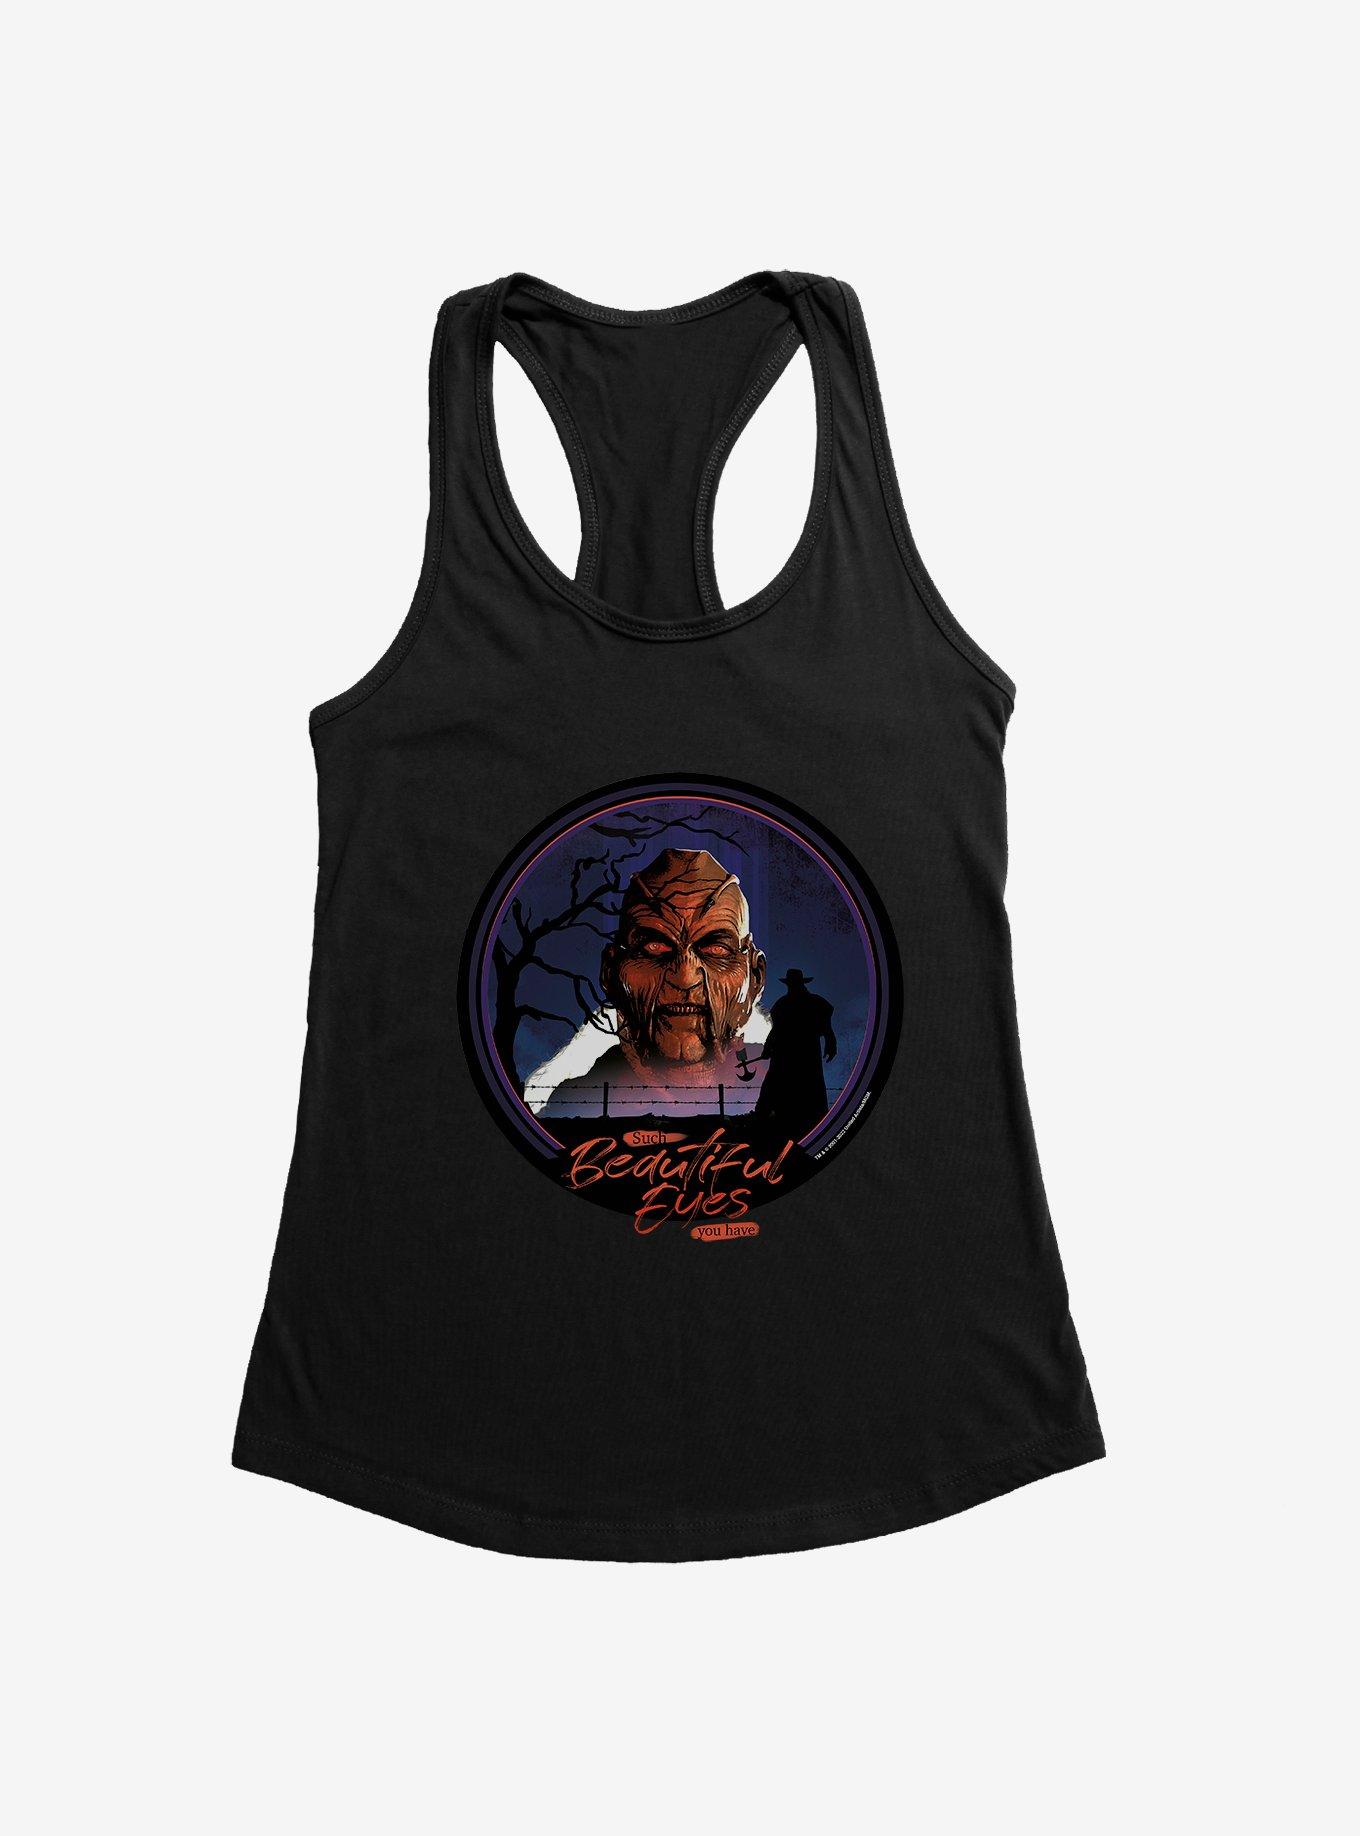 Jeepers Creepers Such Beautiful Eyes Girls Tank, BLACK, hi-res